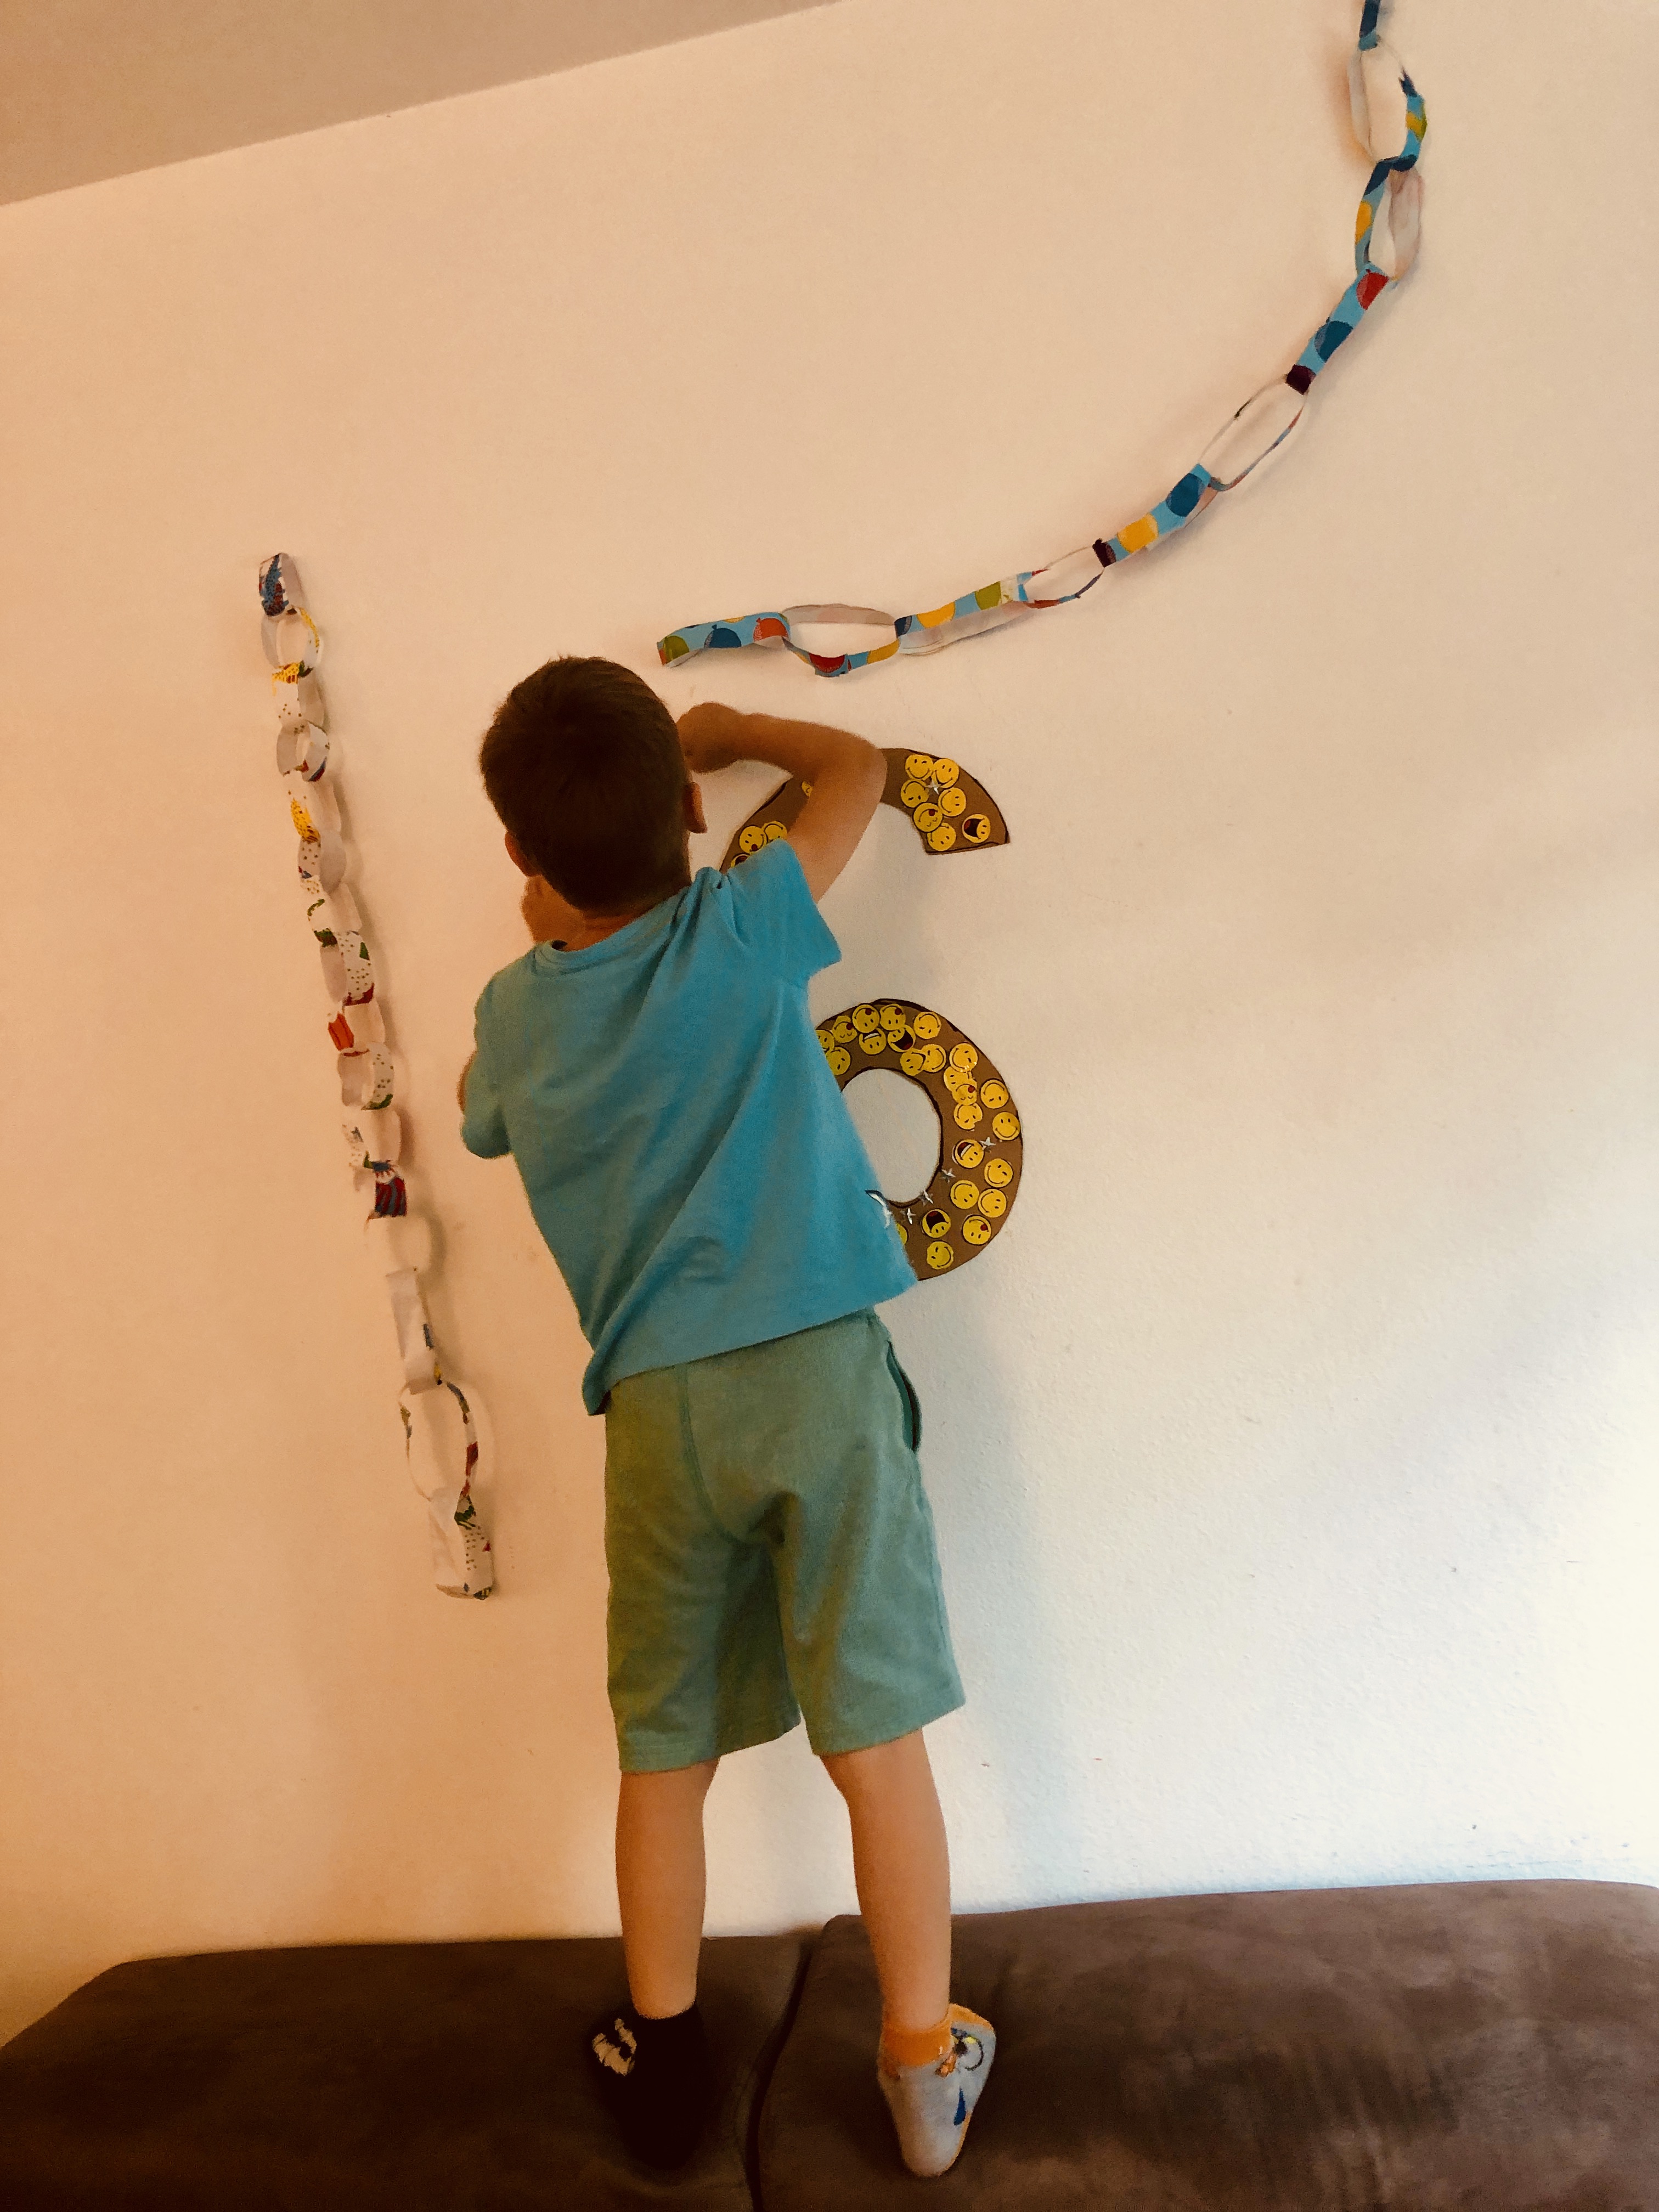 kid putting DIY decorations on the wall